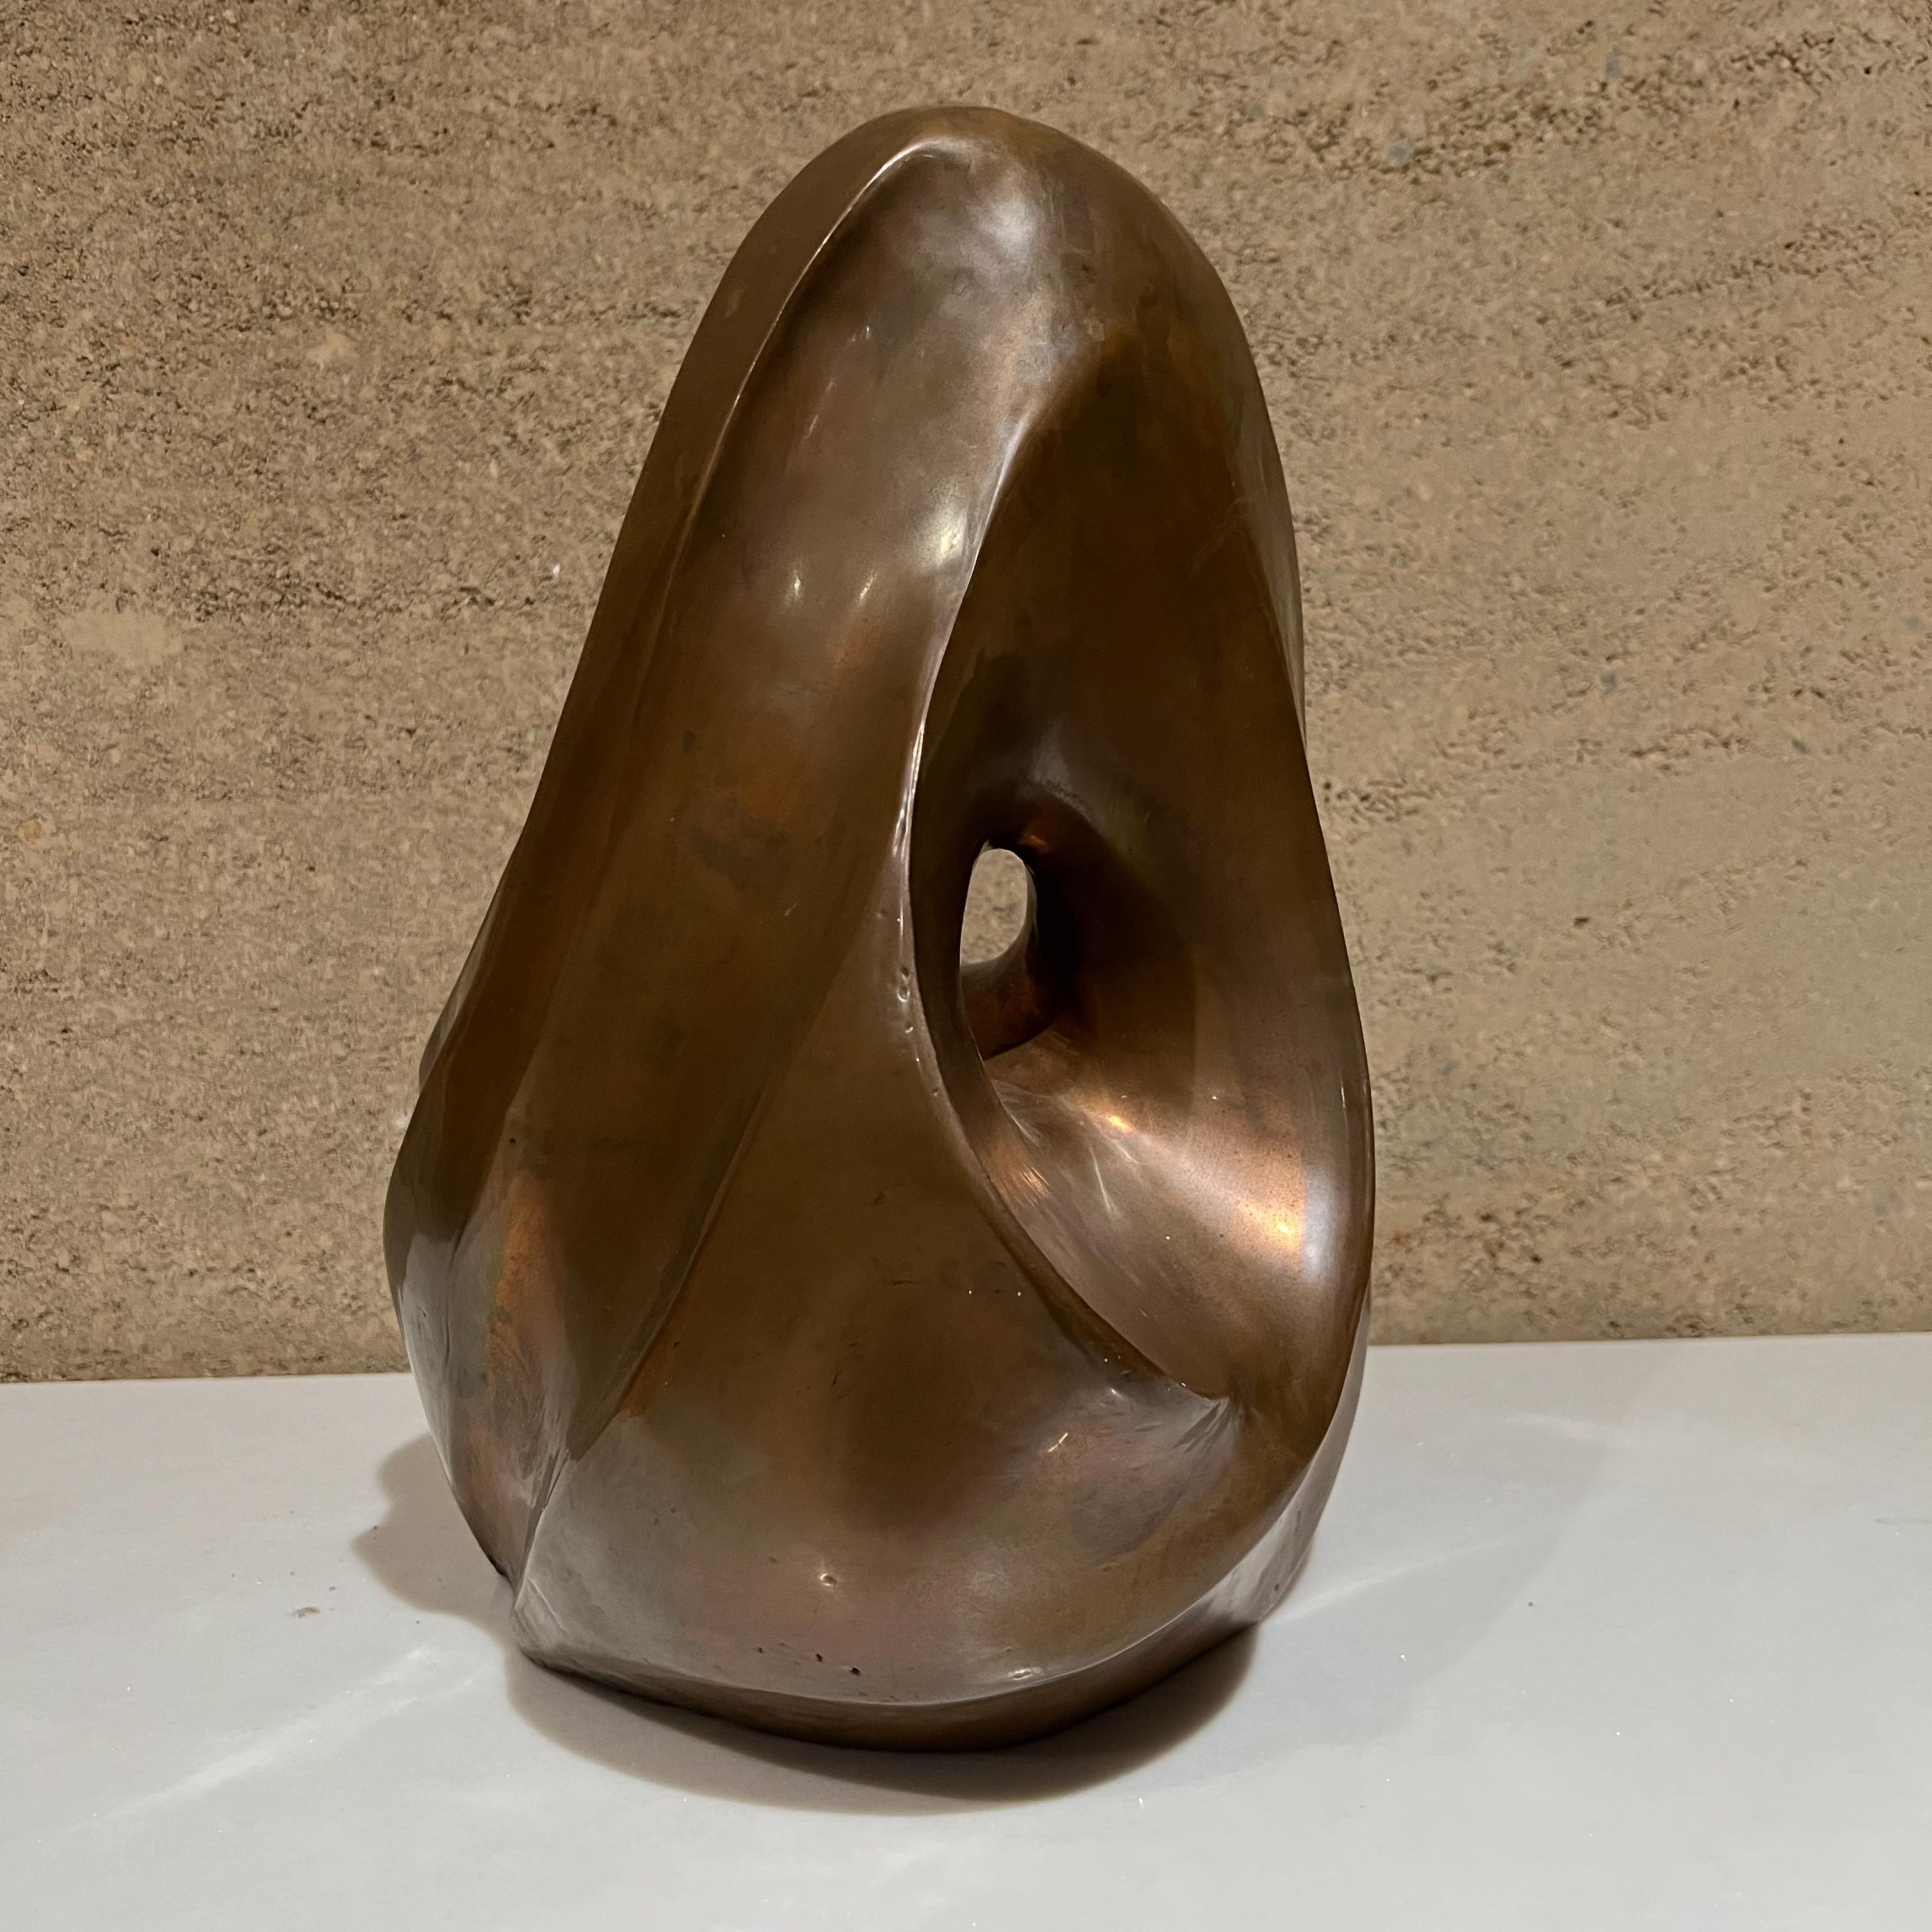 1980s Post Modern Art Table Sculpture in Organic Swirled Copper Signed  For Sale 1